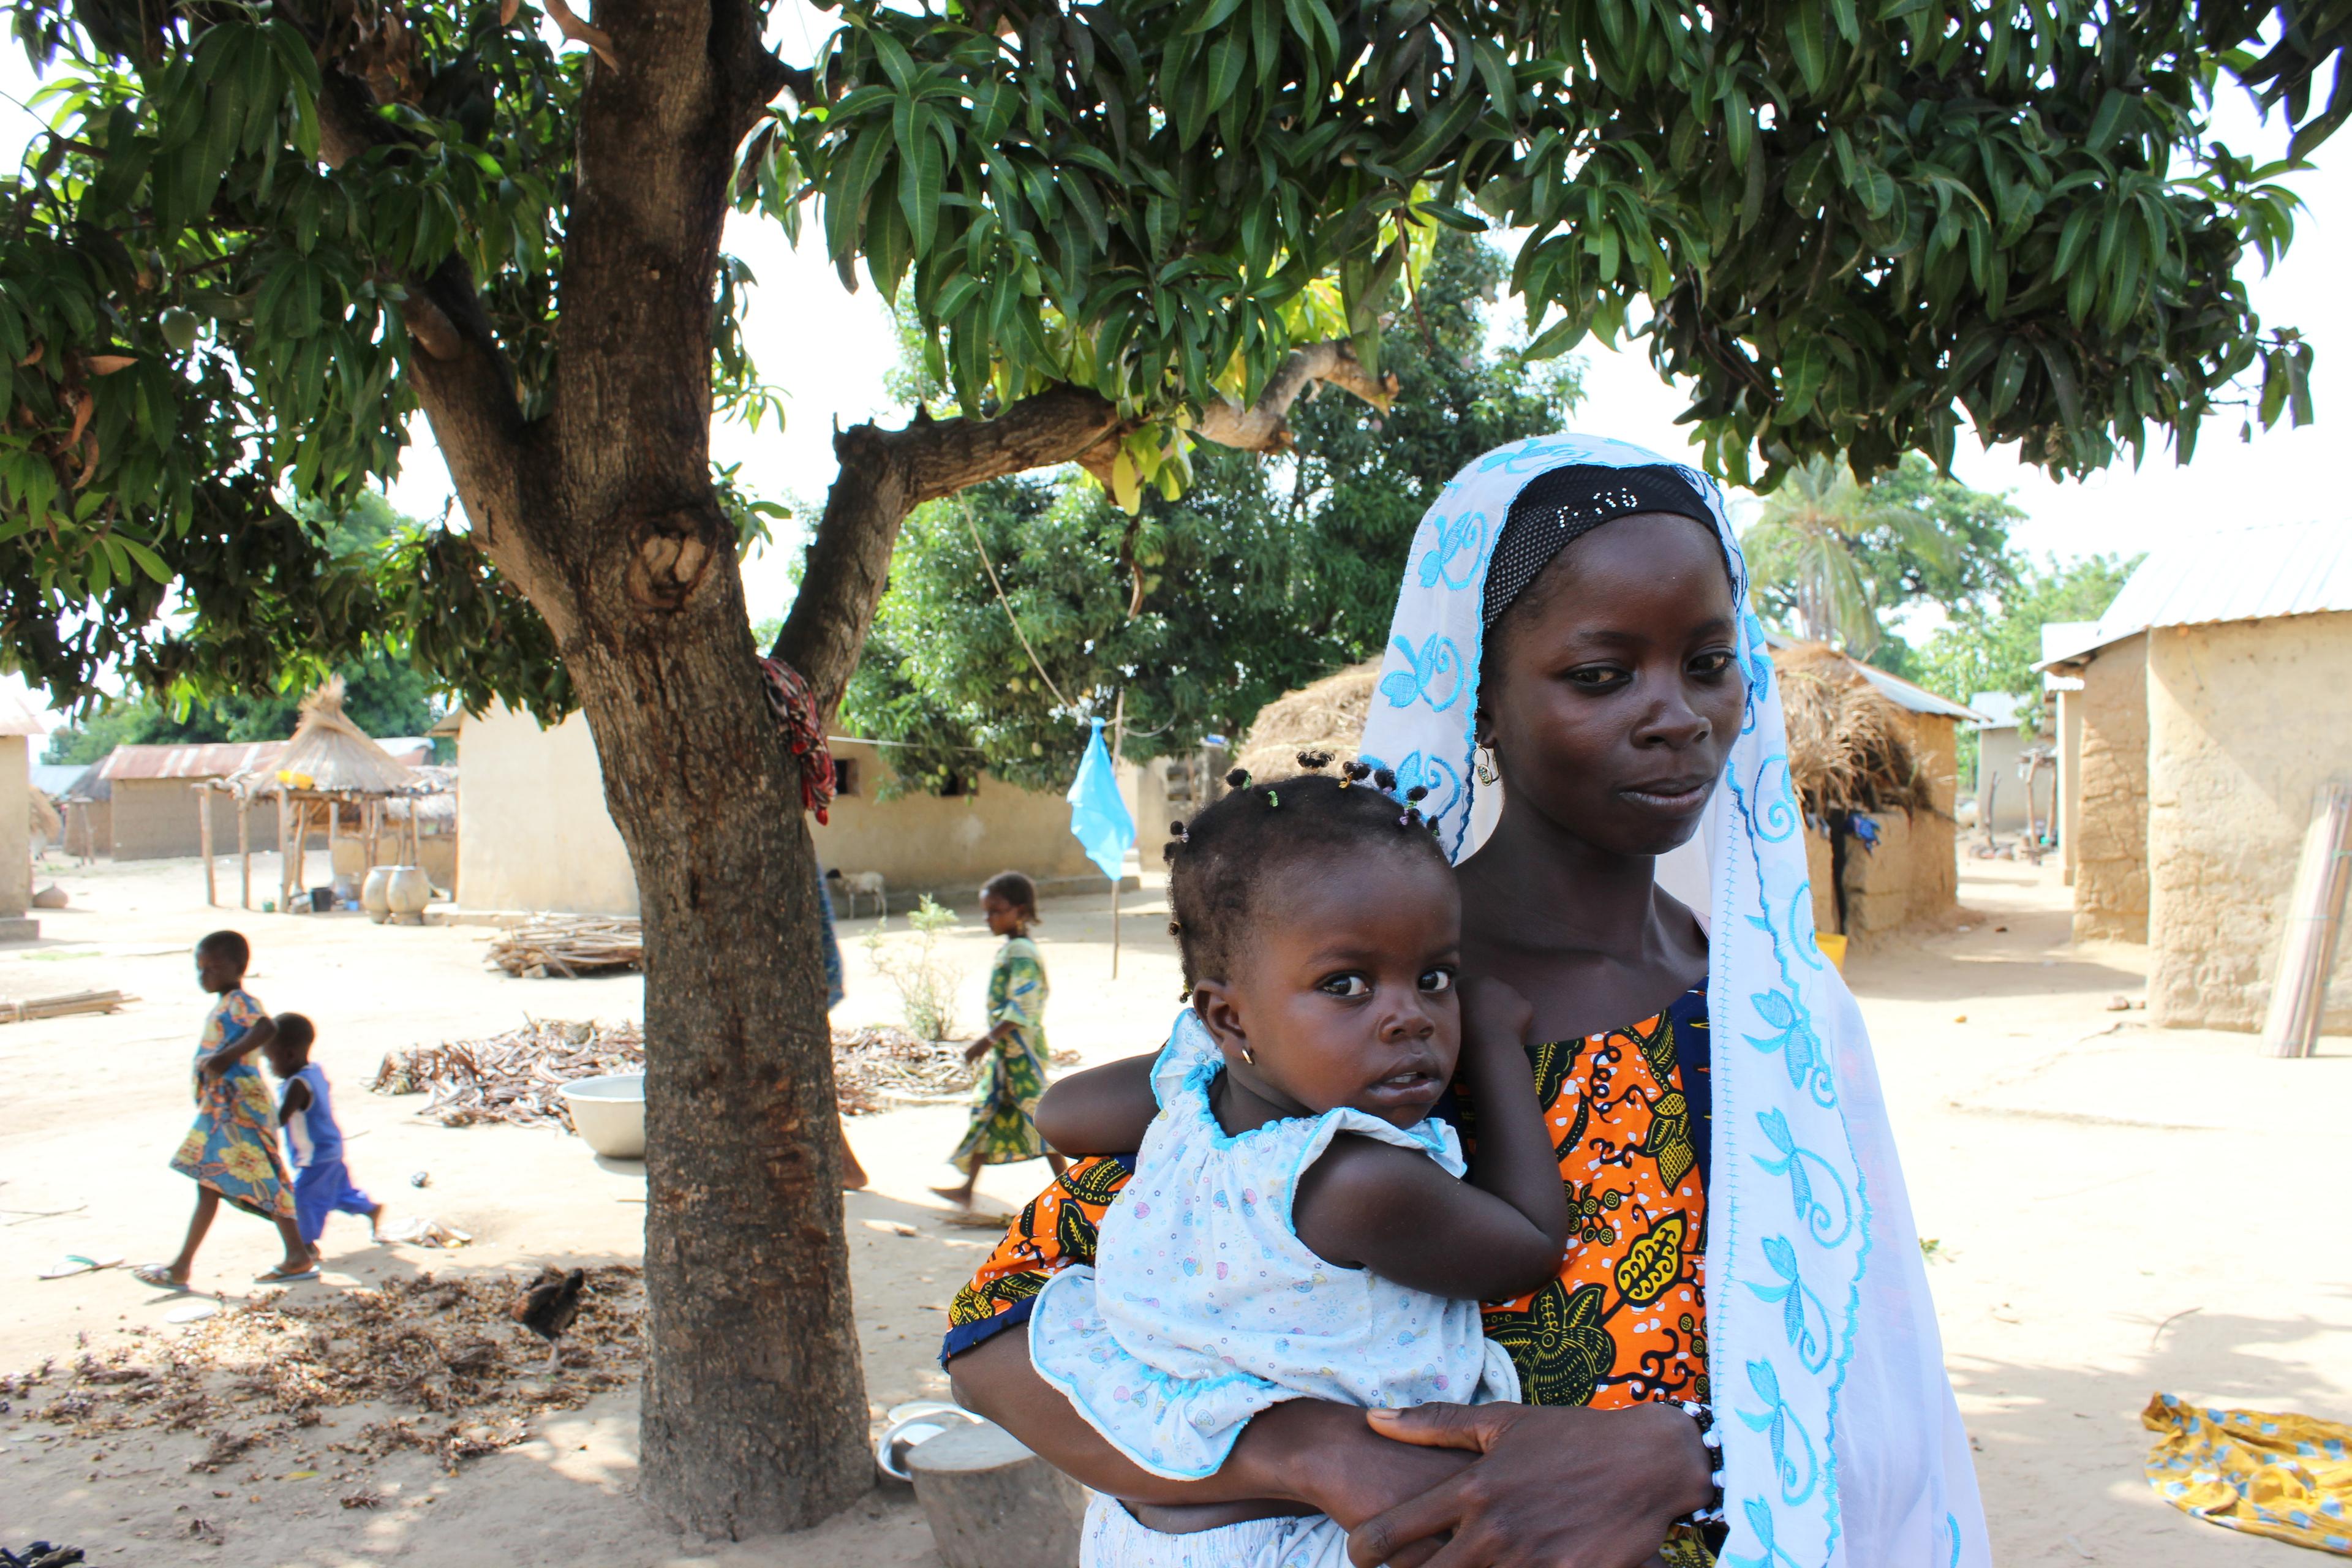 A mother holds an infant in her arms. They are standing in a village under a tree in the shade. In the background there are other children.